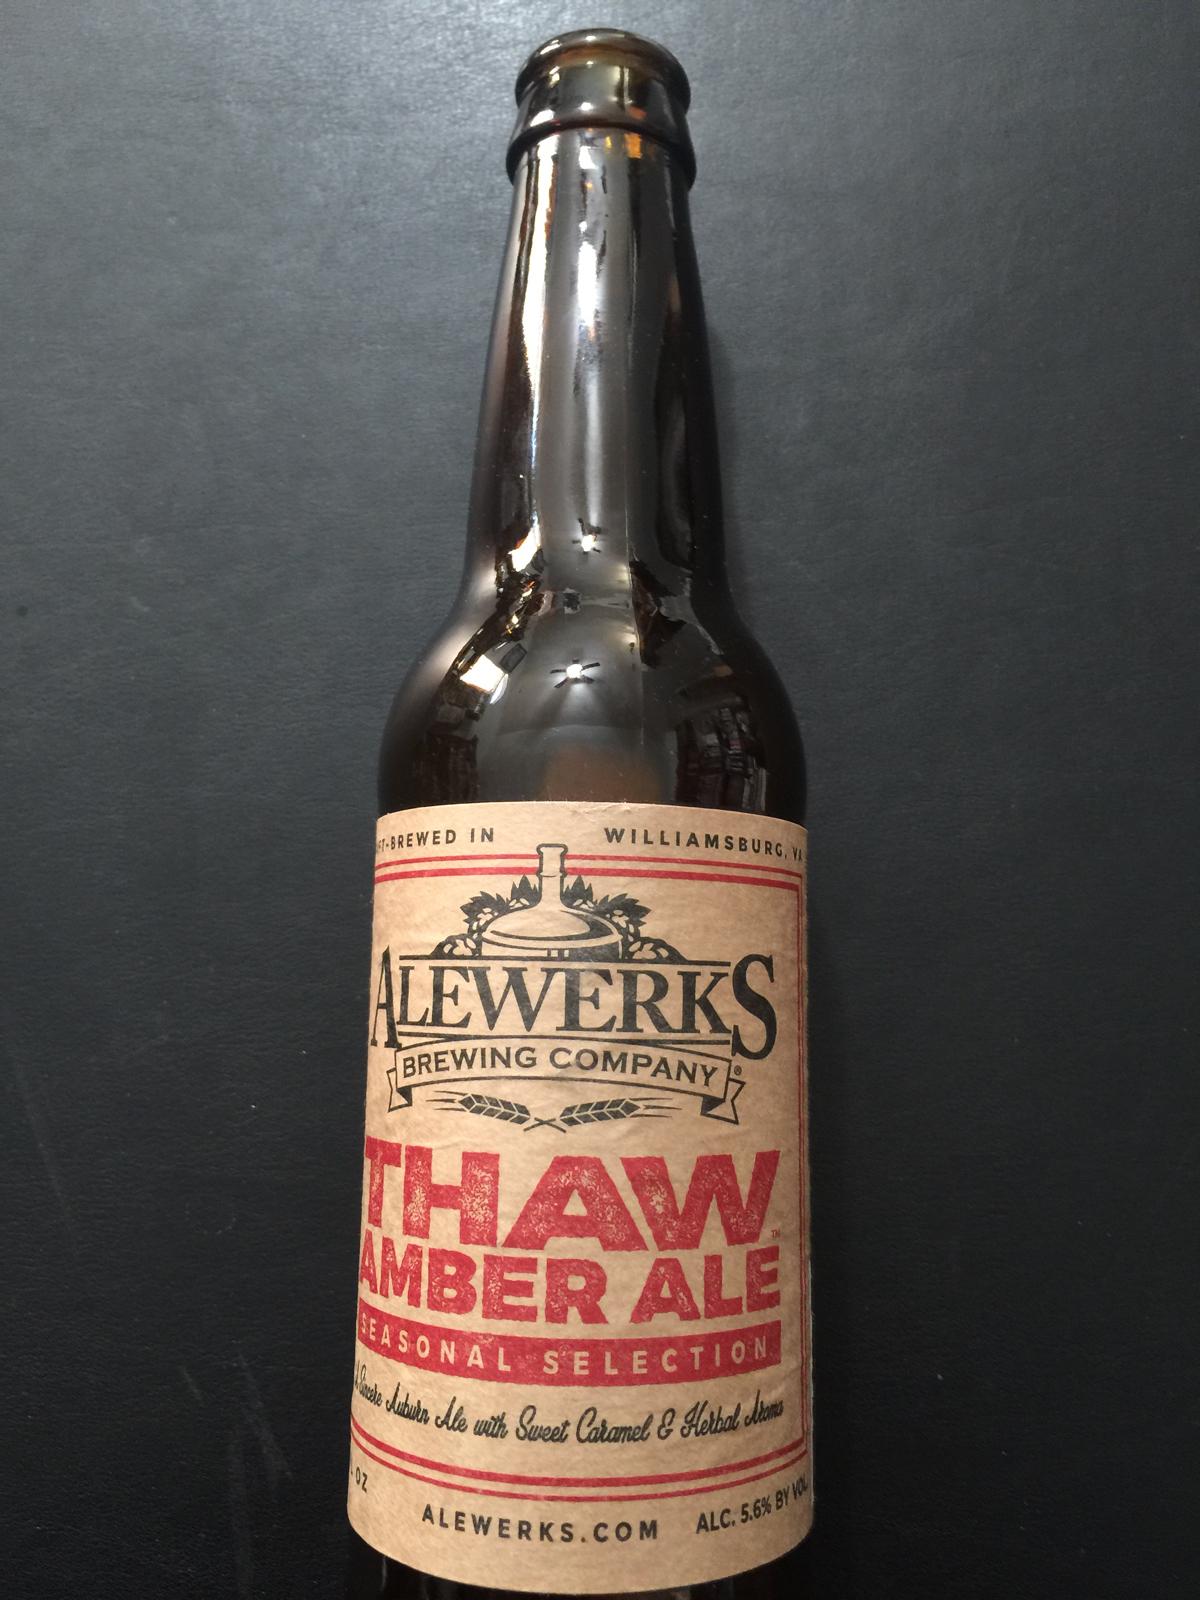 Thaw Amber Ale